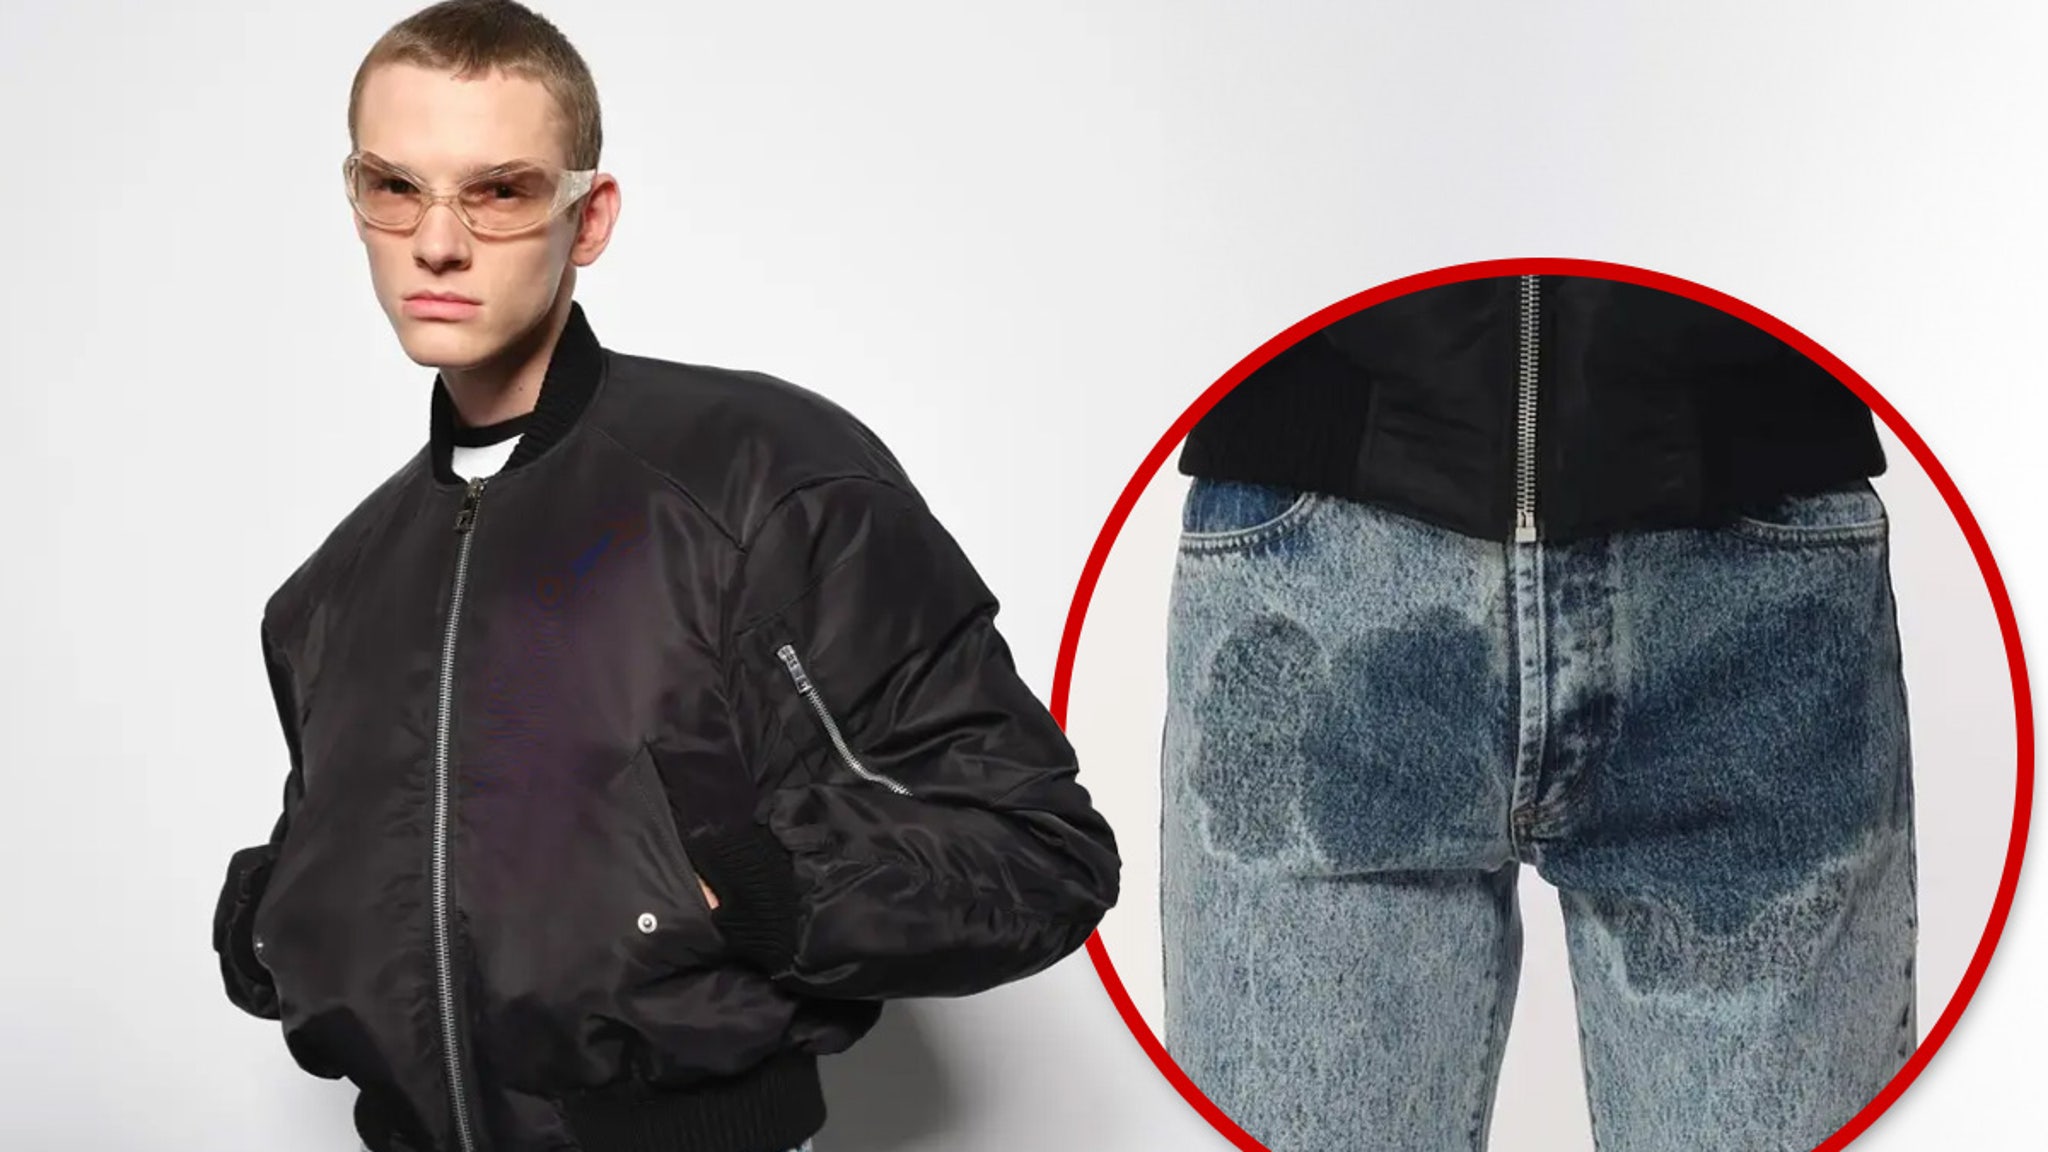 Pee-Stained' Designer Jeans On Sale With Hefty Price Tag, Already Sold Out